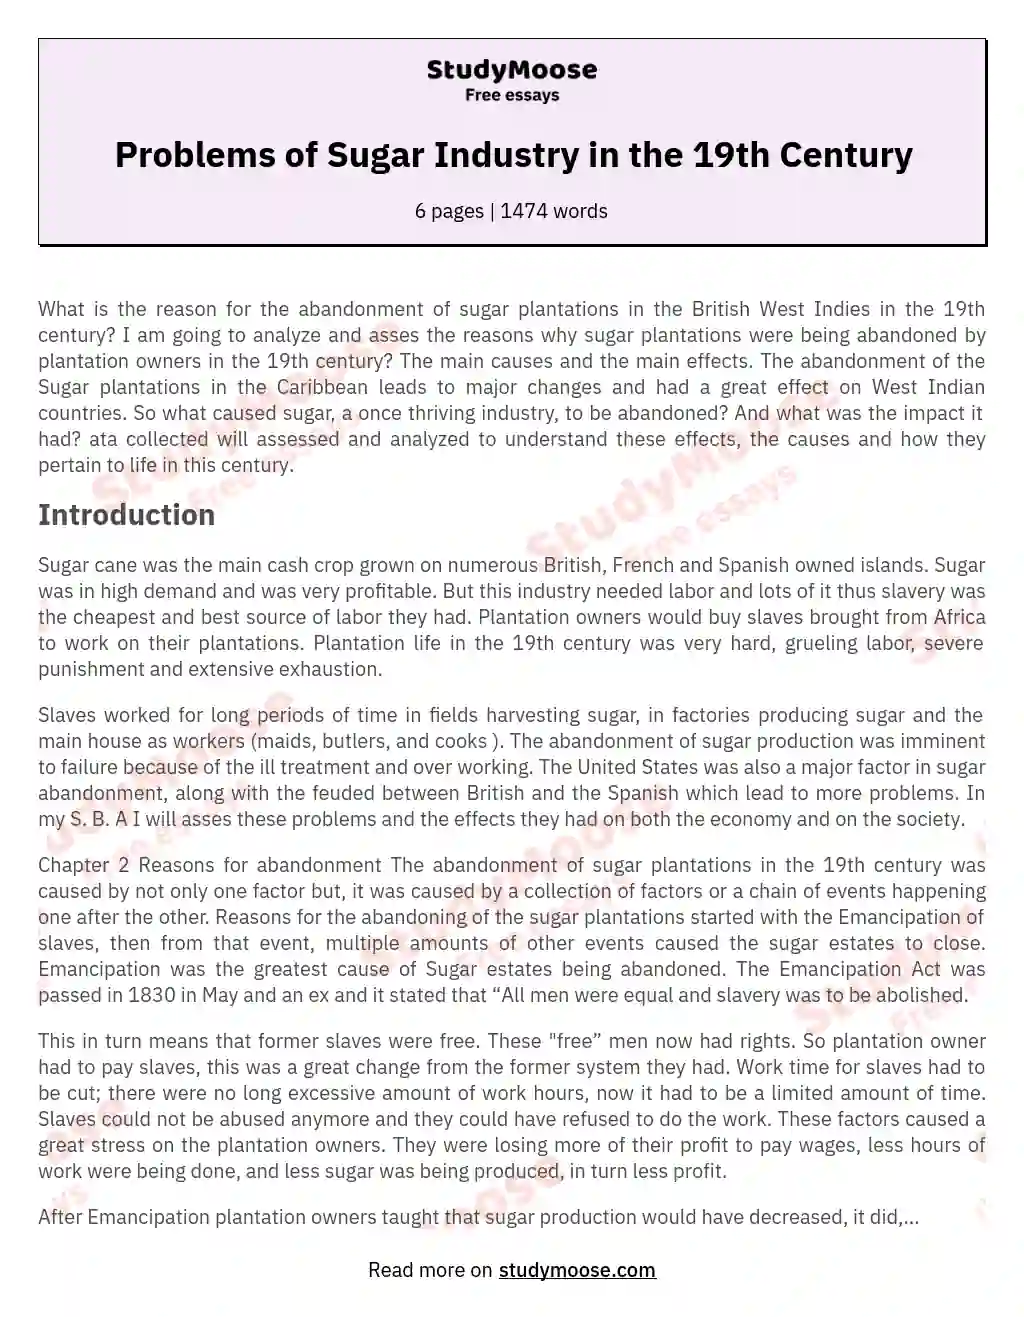 Problems of Sugar Industry in the 19th Century essay